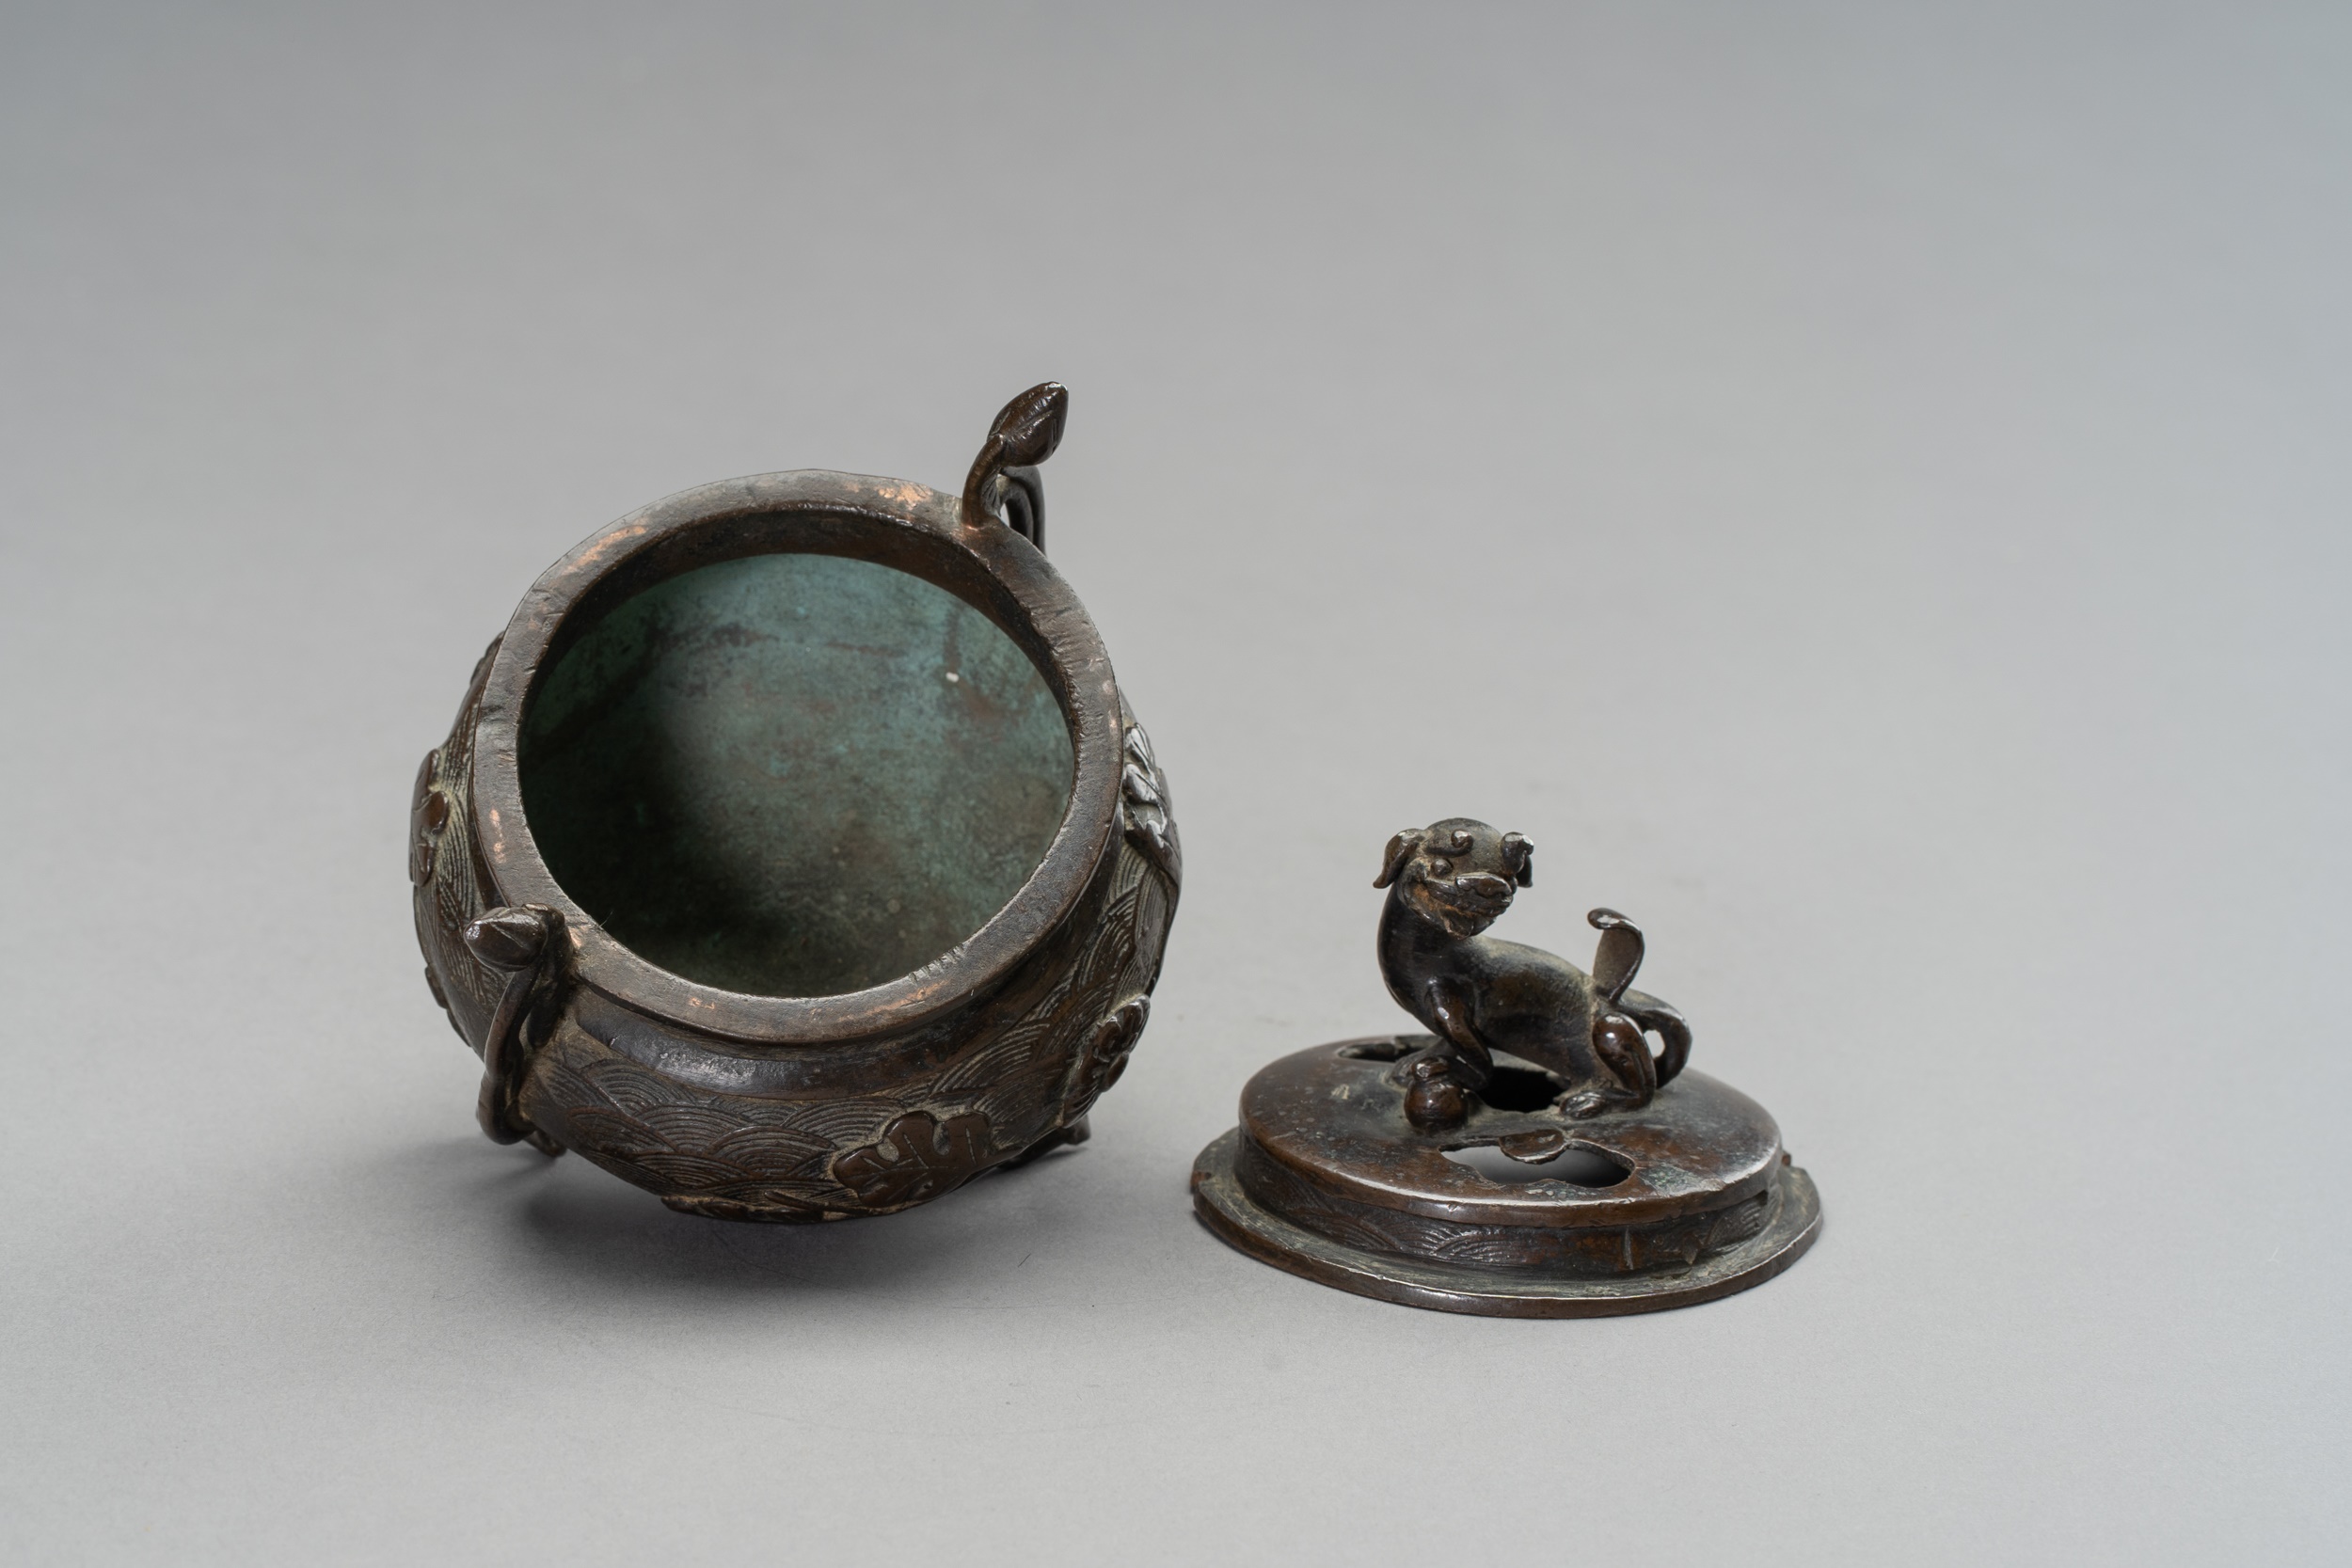 A MINATURE BRONZE TRIPOD CENSER, QING DYNASTY - Image 10 of 11